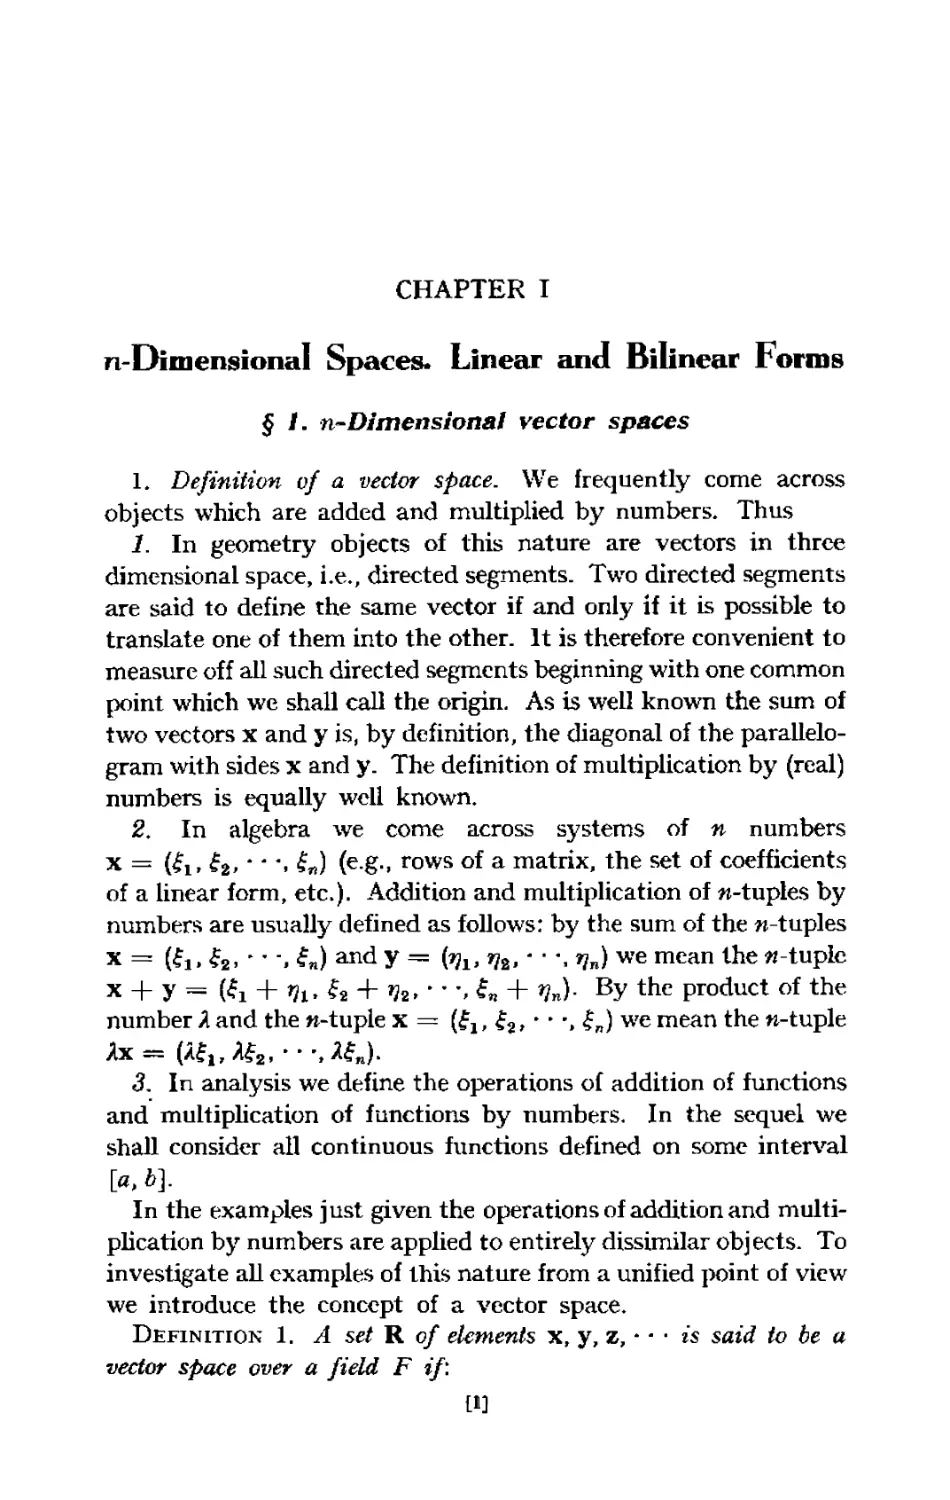 I. n-Dimensional Spaces. Linear and Bilinear Forms